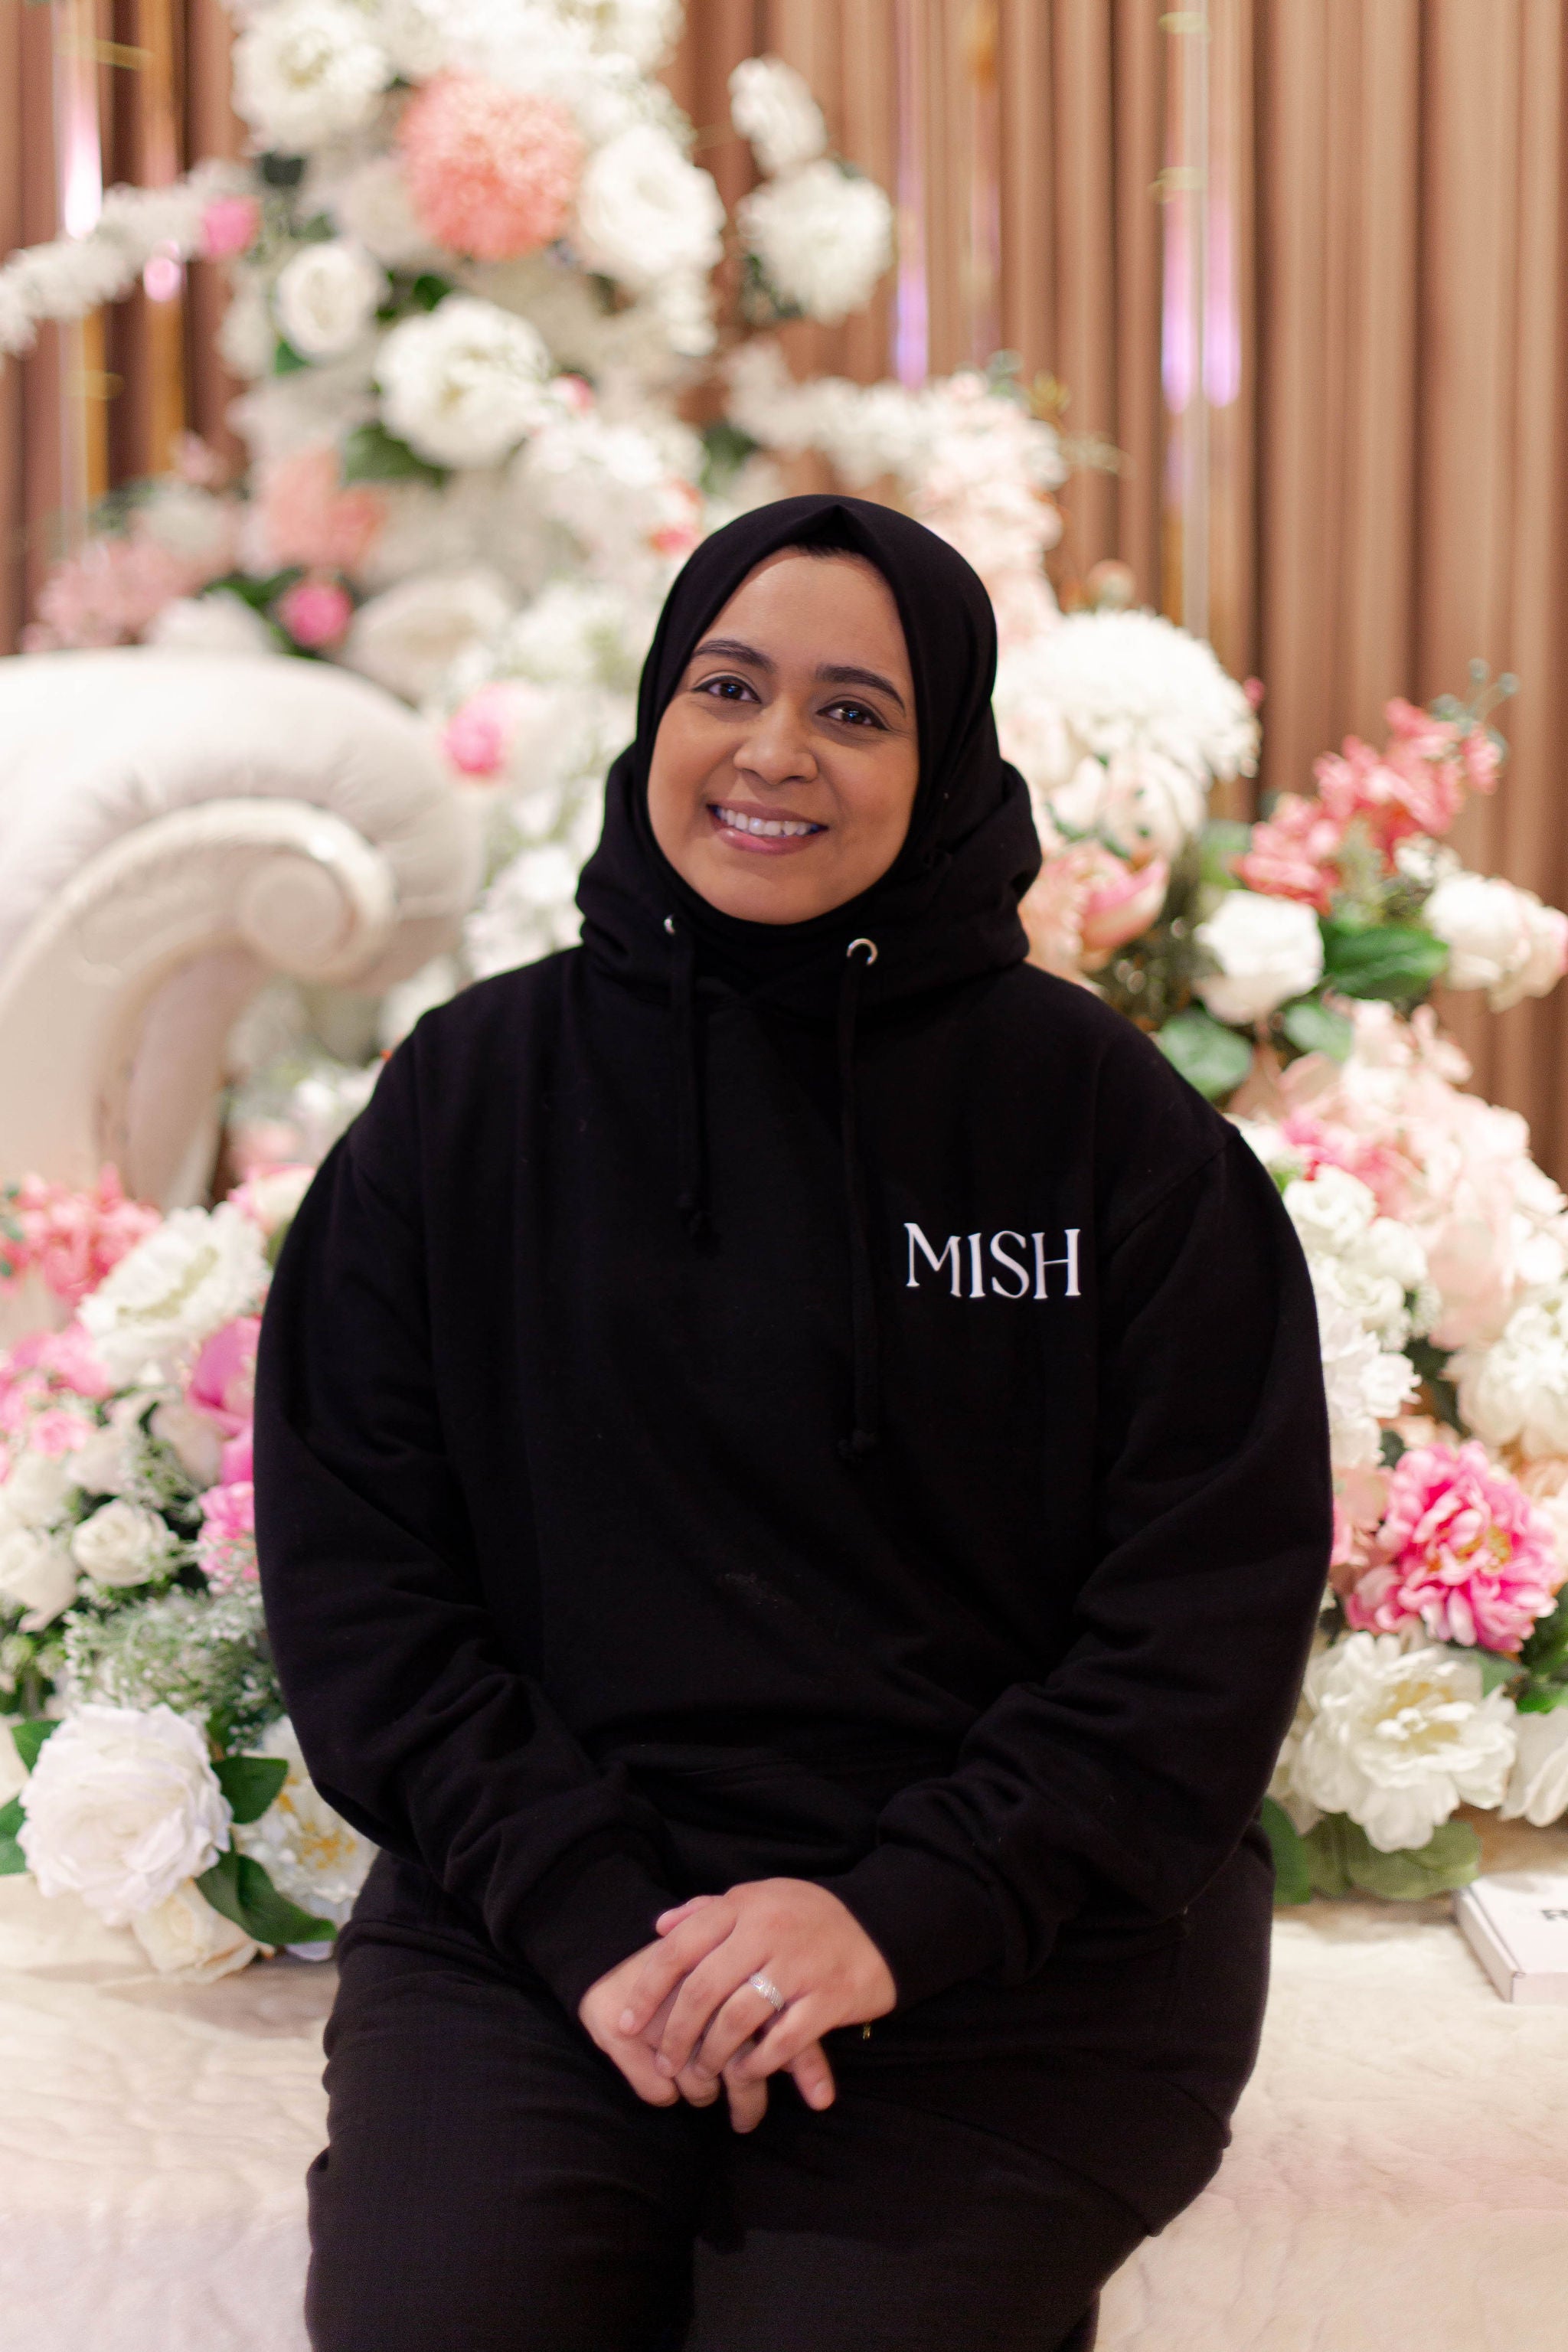 Mish Taznin, founder of Ramadan at Regency, reached out to Muslim women ‘alone in the city’ during the holy month